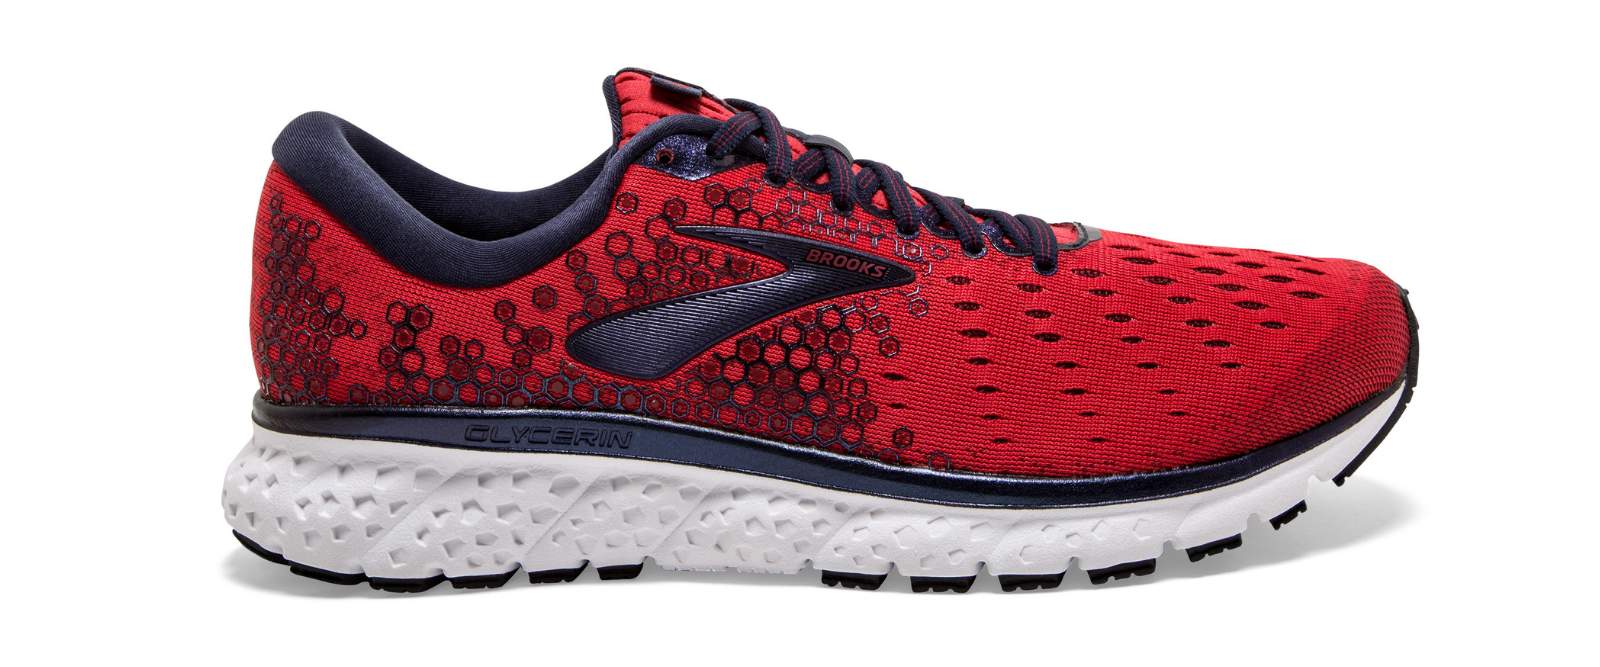 Brooks Glycerin 17 lateral